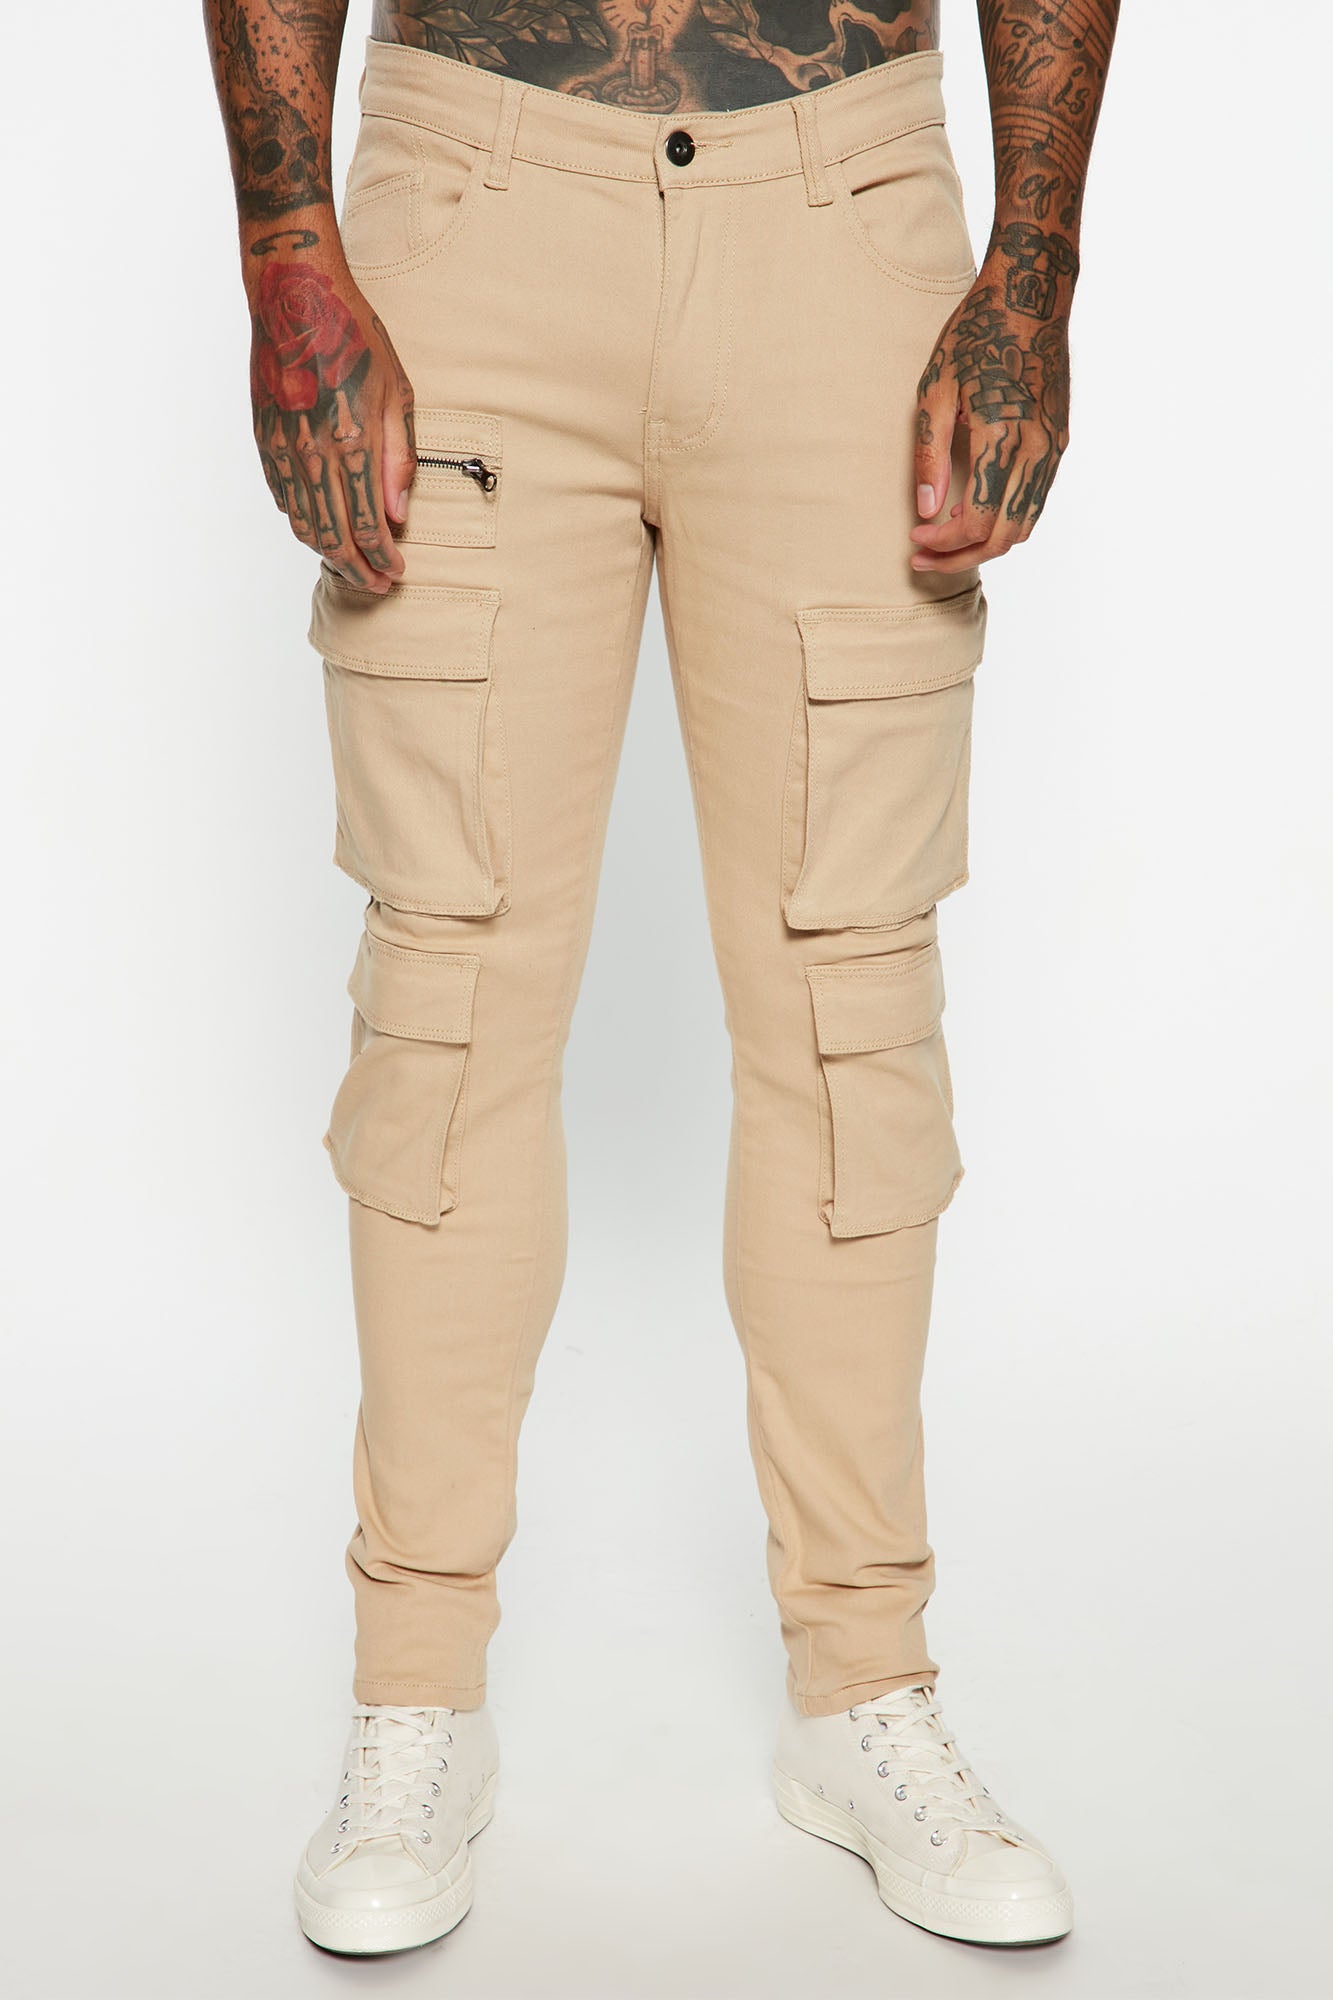 PREME Twill Cargo Skinny Stretch Pant - Men's Pants in Sydney Olive | Buckle